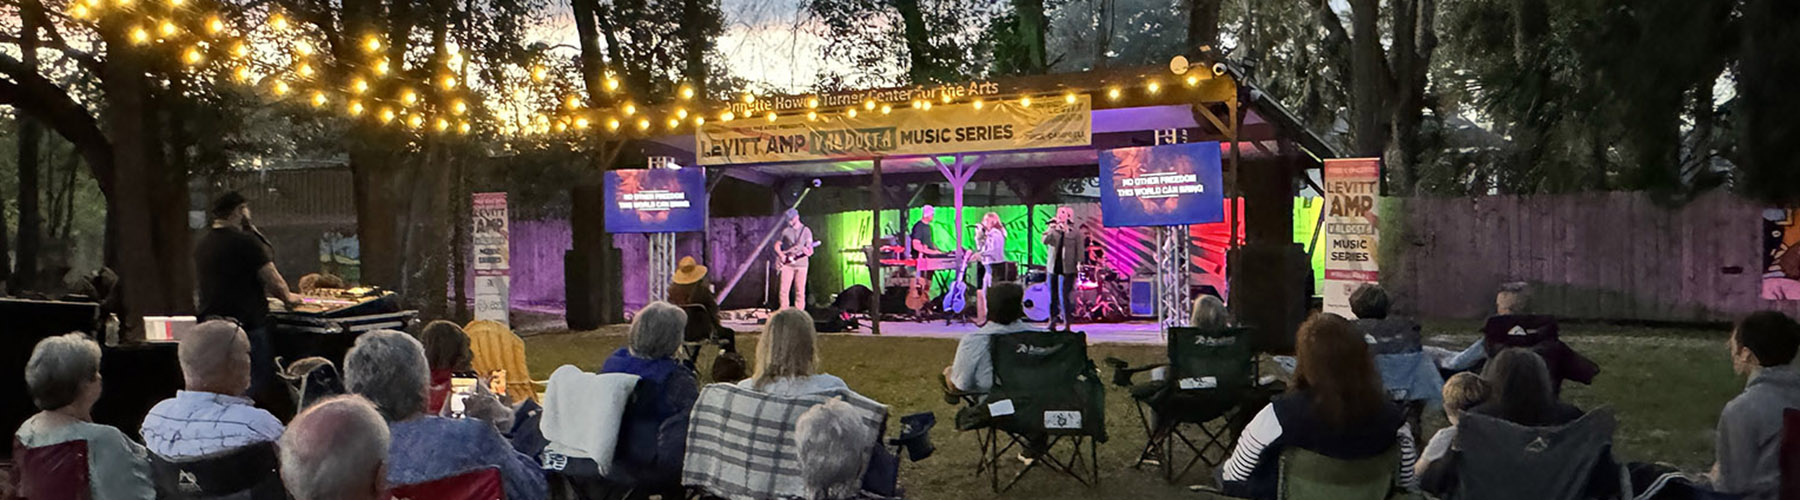 Turner Center Launches 2nd Year of Free Live Music with the Levitt AMP Valdosta Music Series